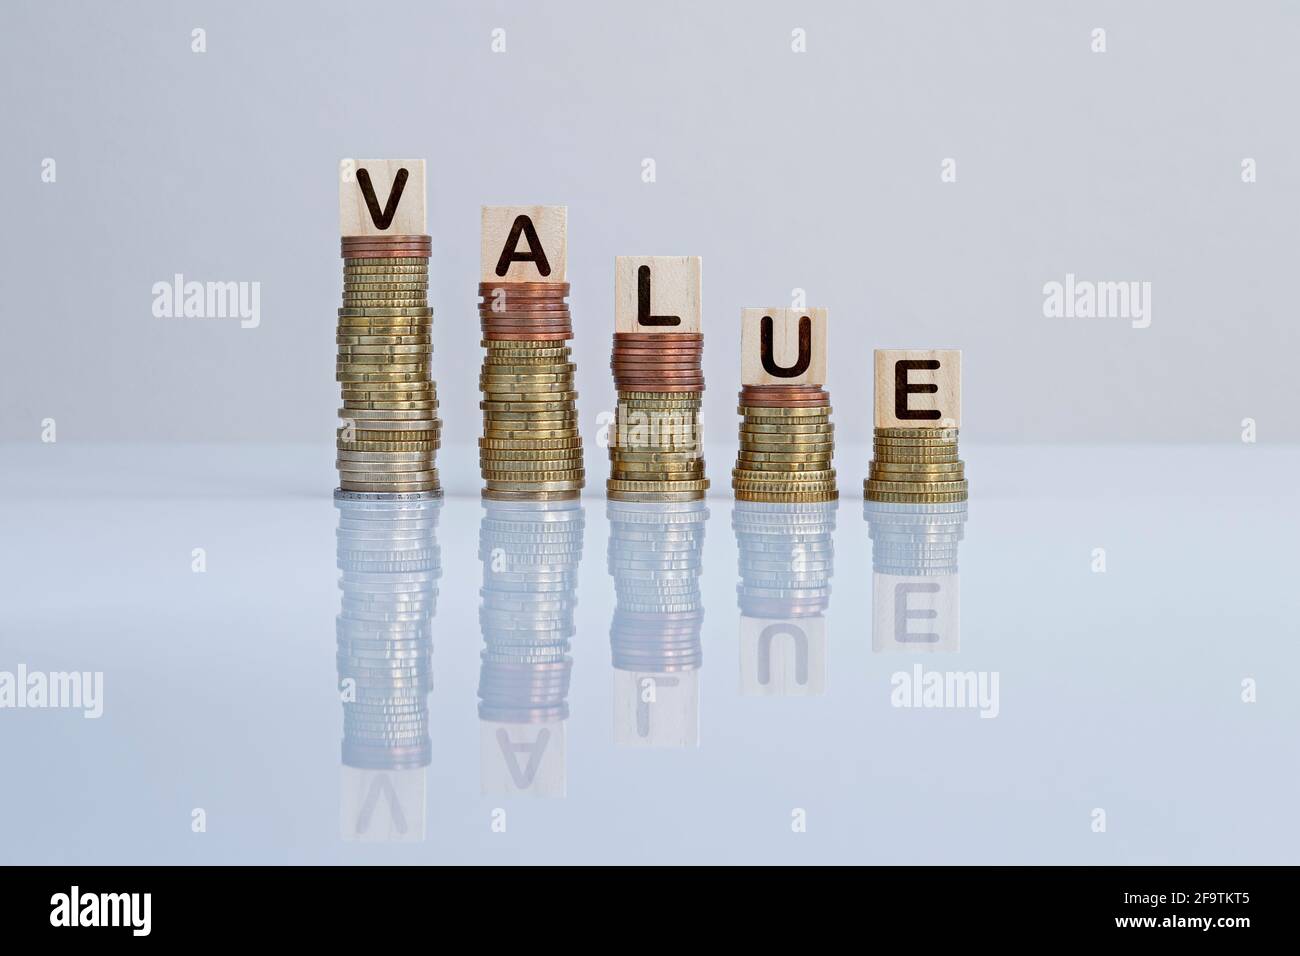 Word 'VALUE' on wooden blocks on top of descending stacks of coins against gray background. Concept photo of business, finance and failure. Stock Photo